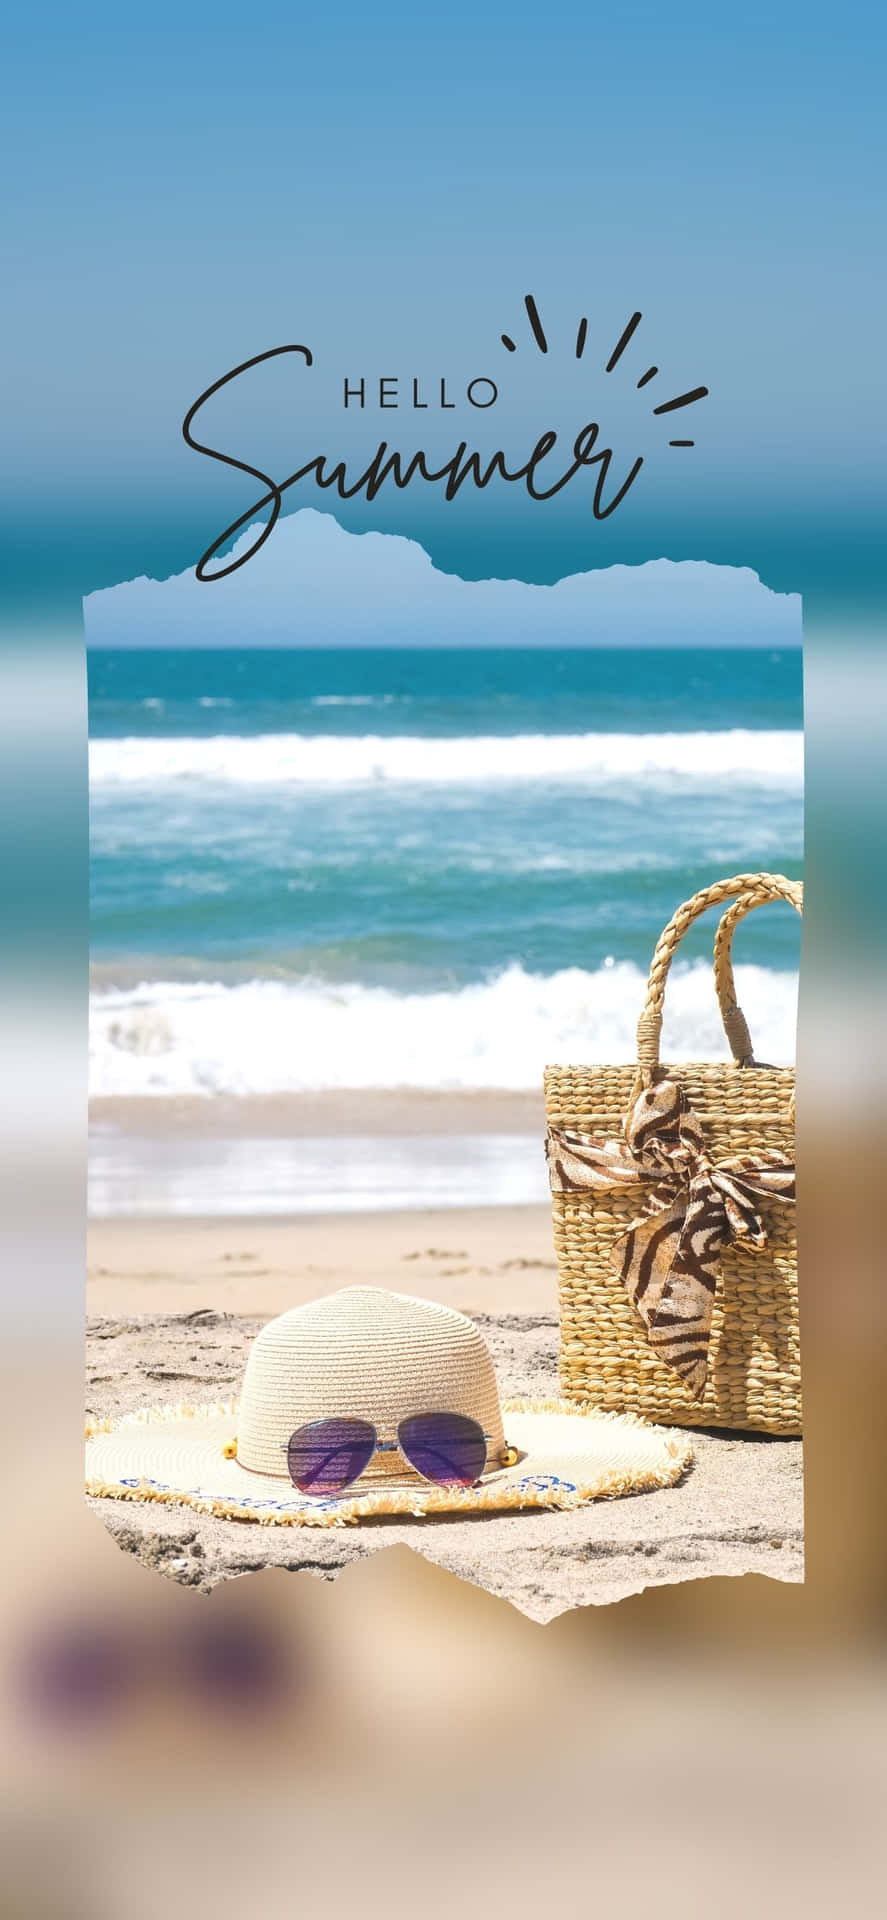 Beach Bag And Hat iPhone X Summer Background